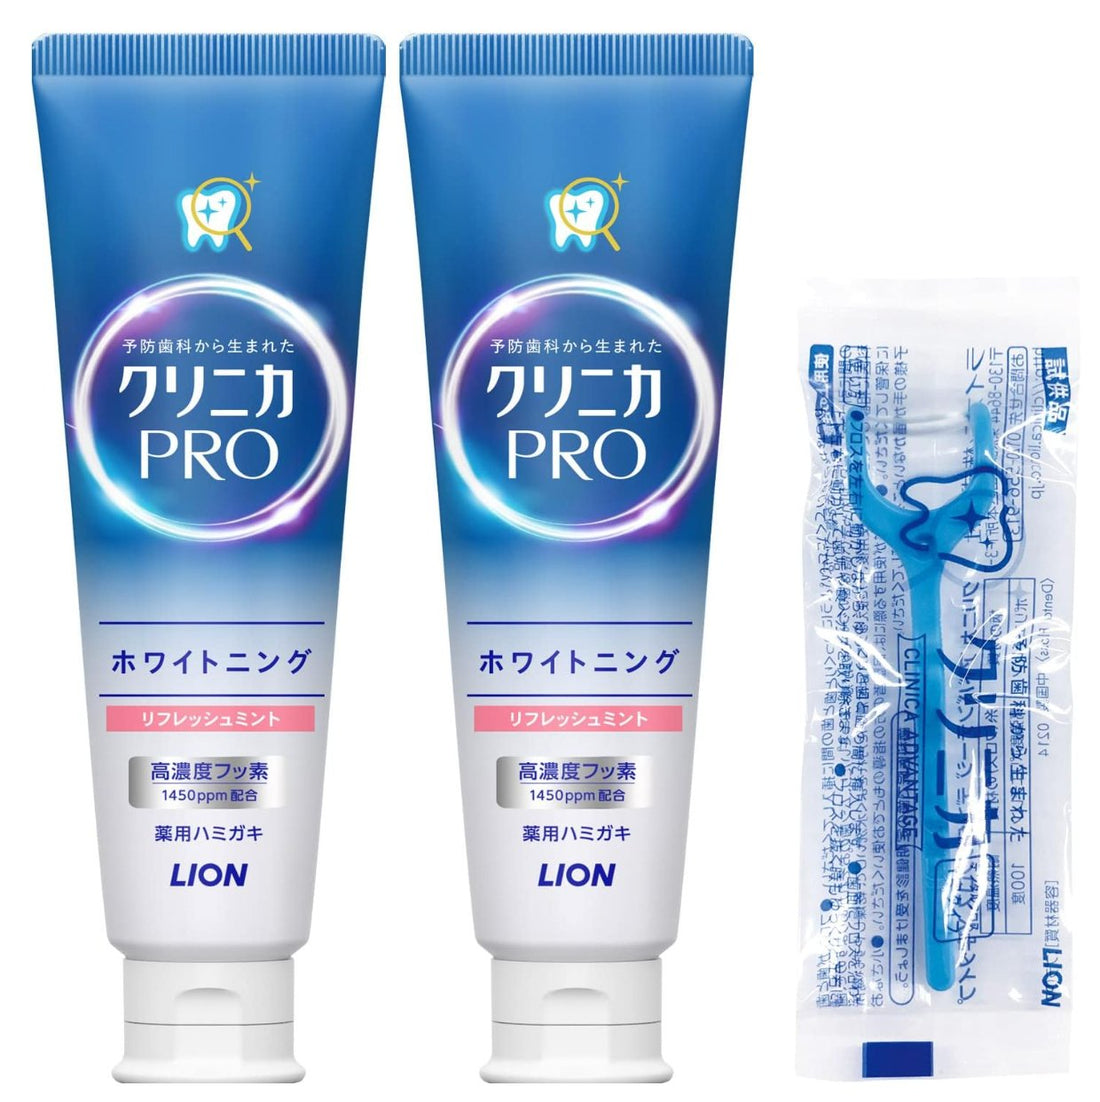 Clinica PRO [Quasi-drug] Whitening Toothpaste Refresh Mint Toothpaste Fluorine 95g x 2 + Floss Included - NihonMura